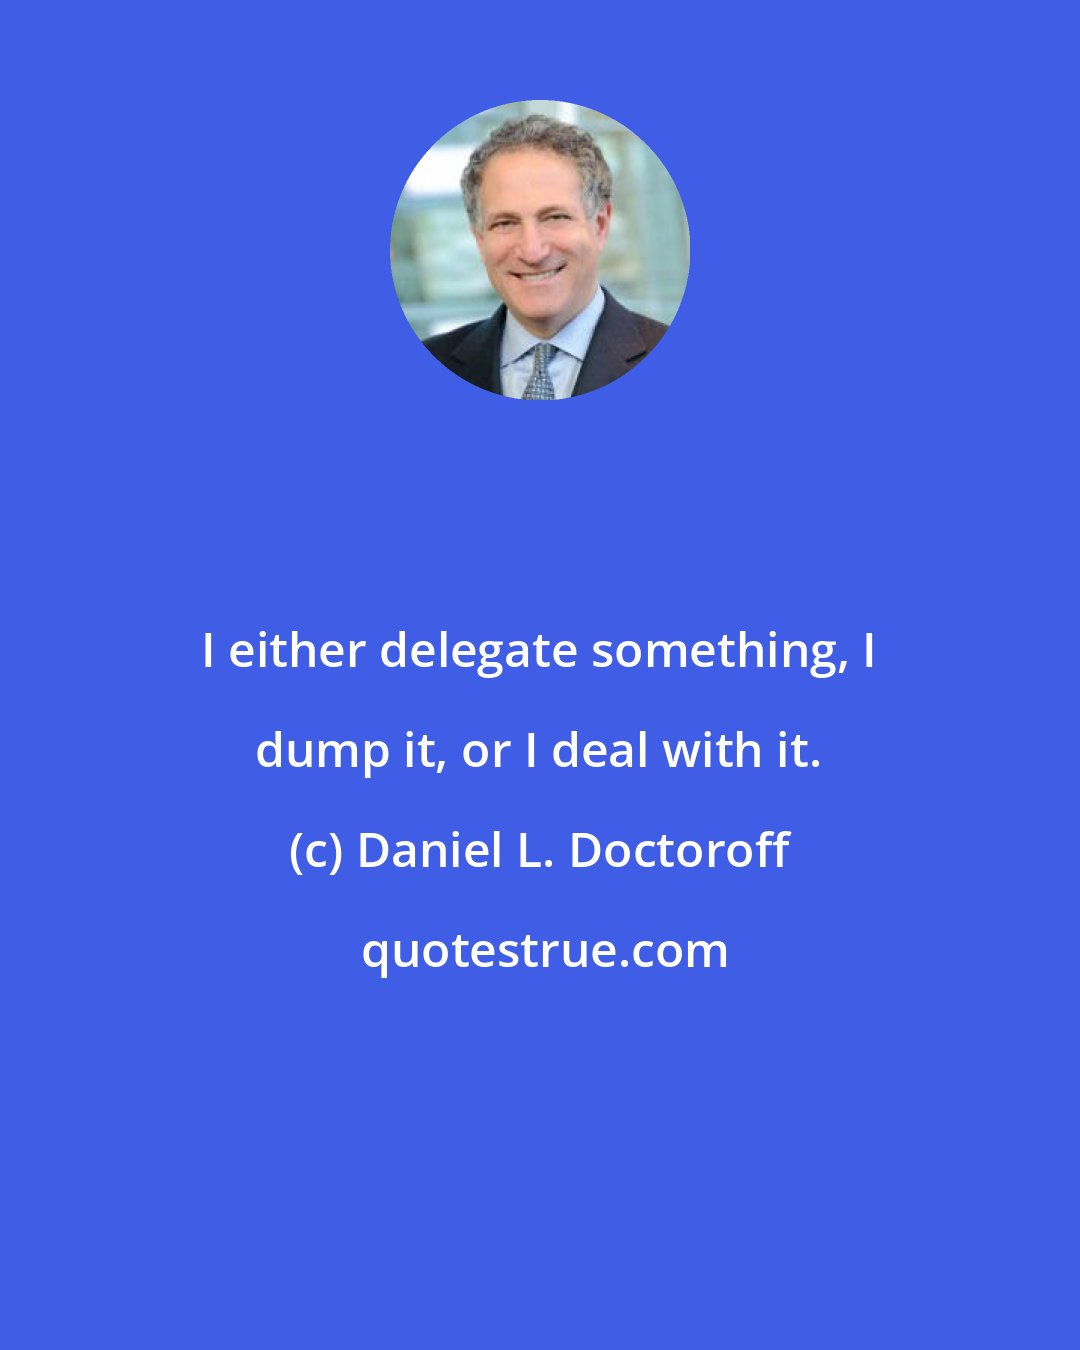 Daniel L. Doctoroff: I either delegate something, I dump it, or I deal with it.